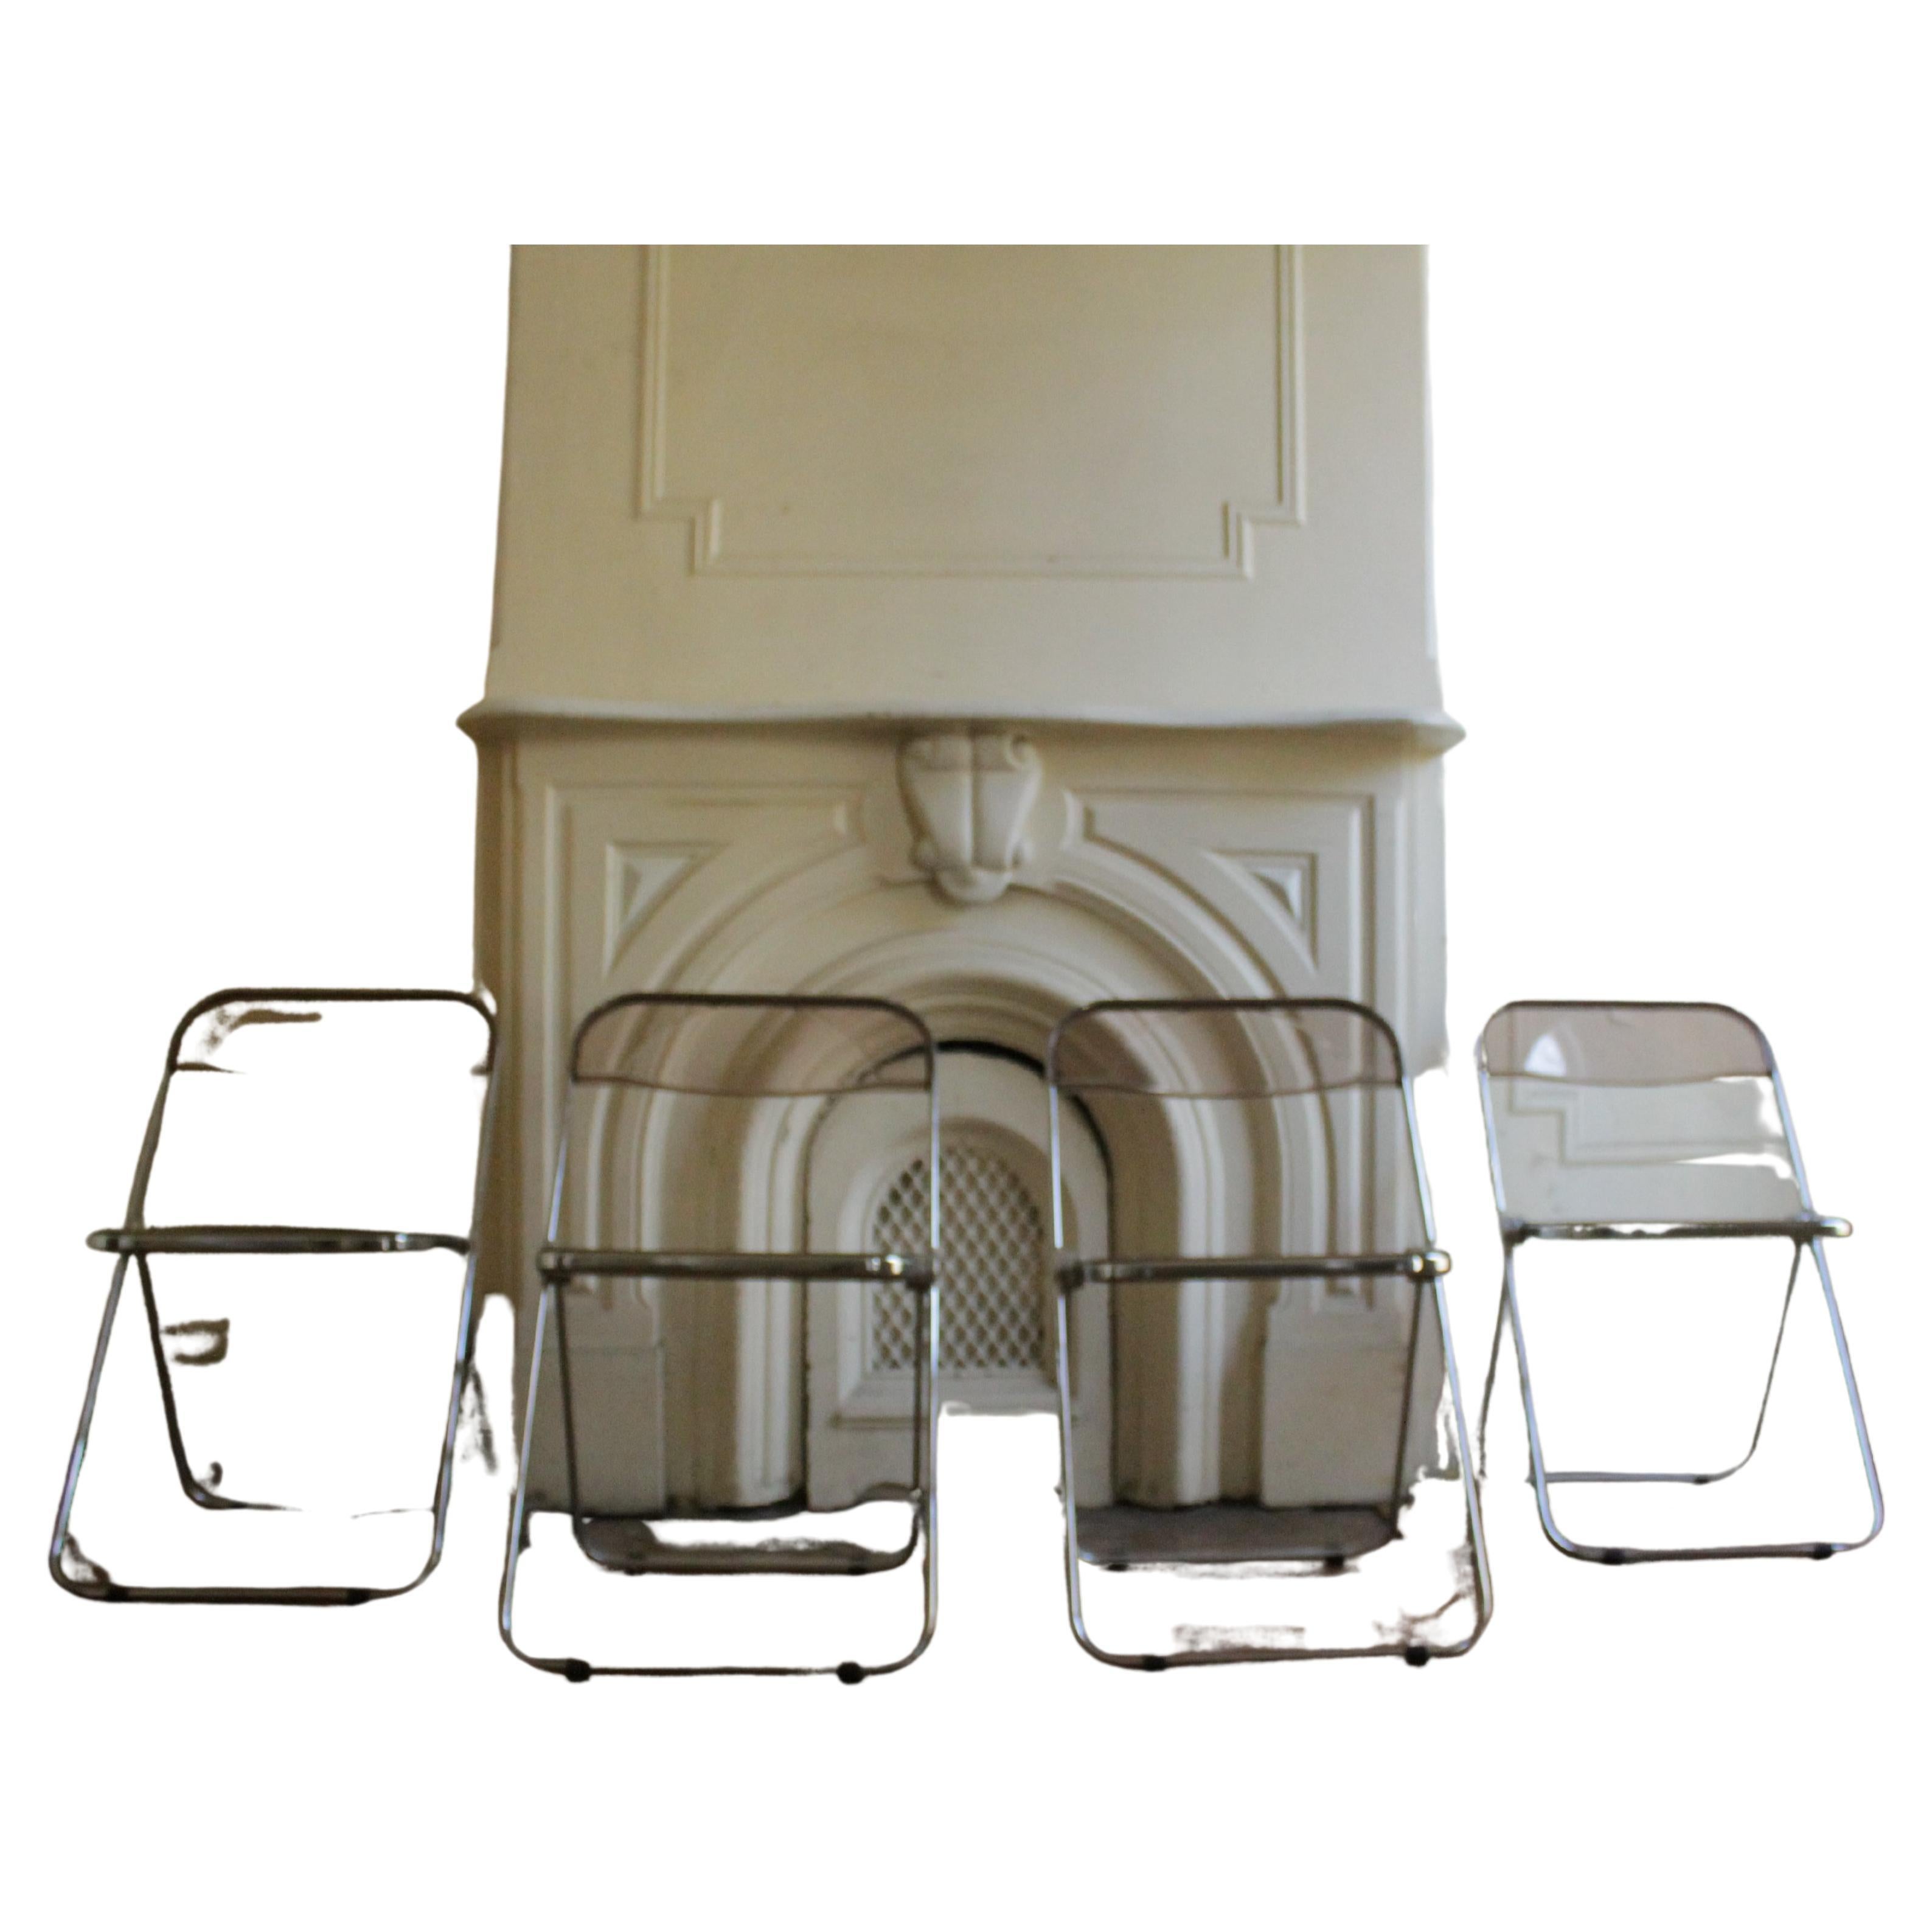 Smoked Lucite and Chrome Plia folding chairs by Giancarlo Piretti for Castelli